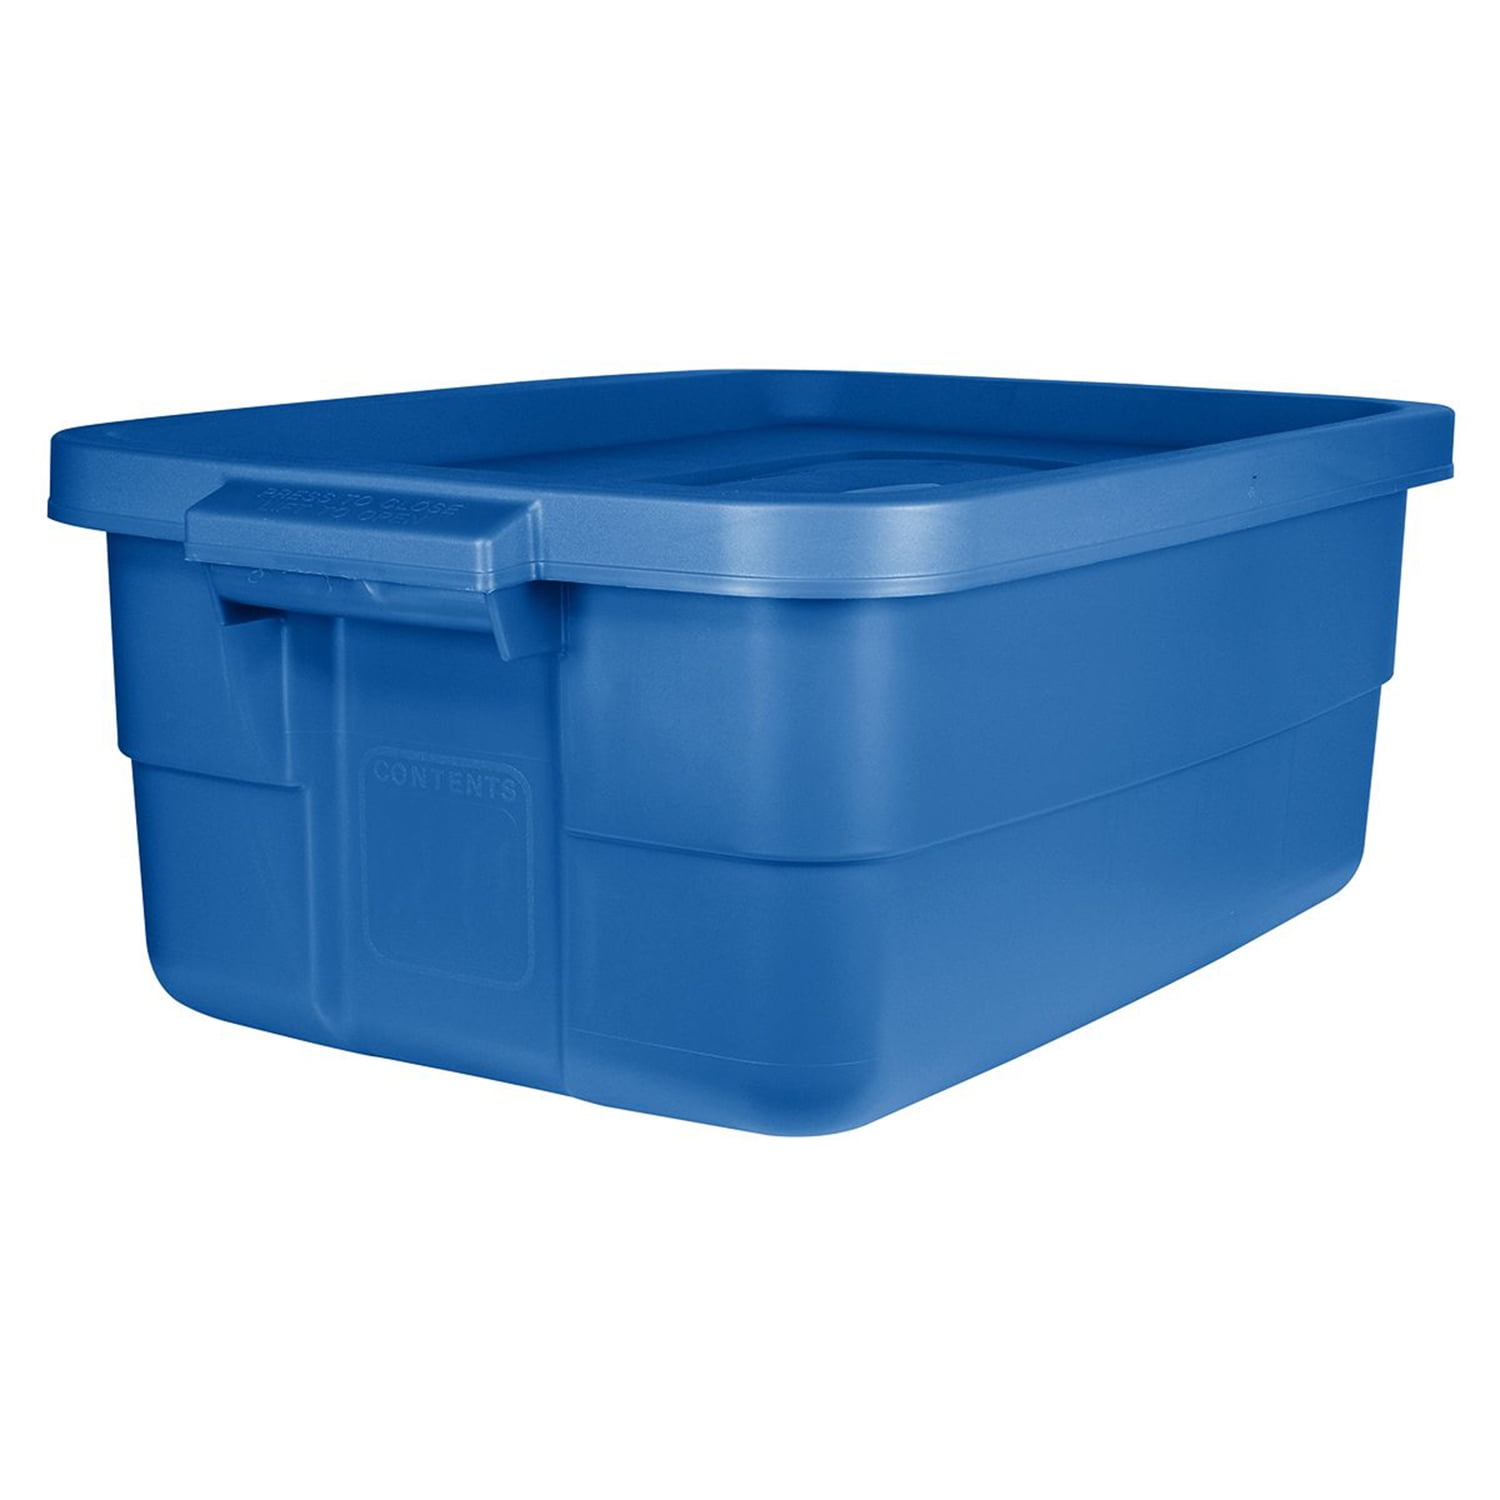  Rubbermaid Roughneck️ 10 Gallon Storage Totes, Pack of 6,  Durable Stackable Storage Containers with Lids, Nestable Plastic Storage  Bins for Tools, Moving Boxes, Toy Storage, Heritage Blue : Tools & Home  Improvement